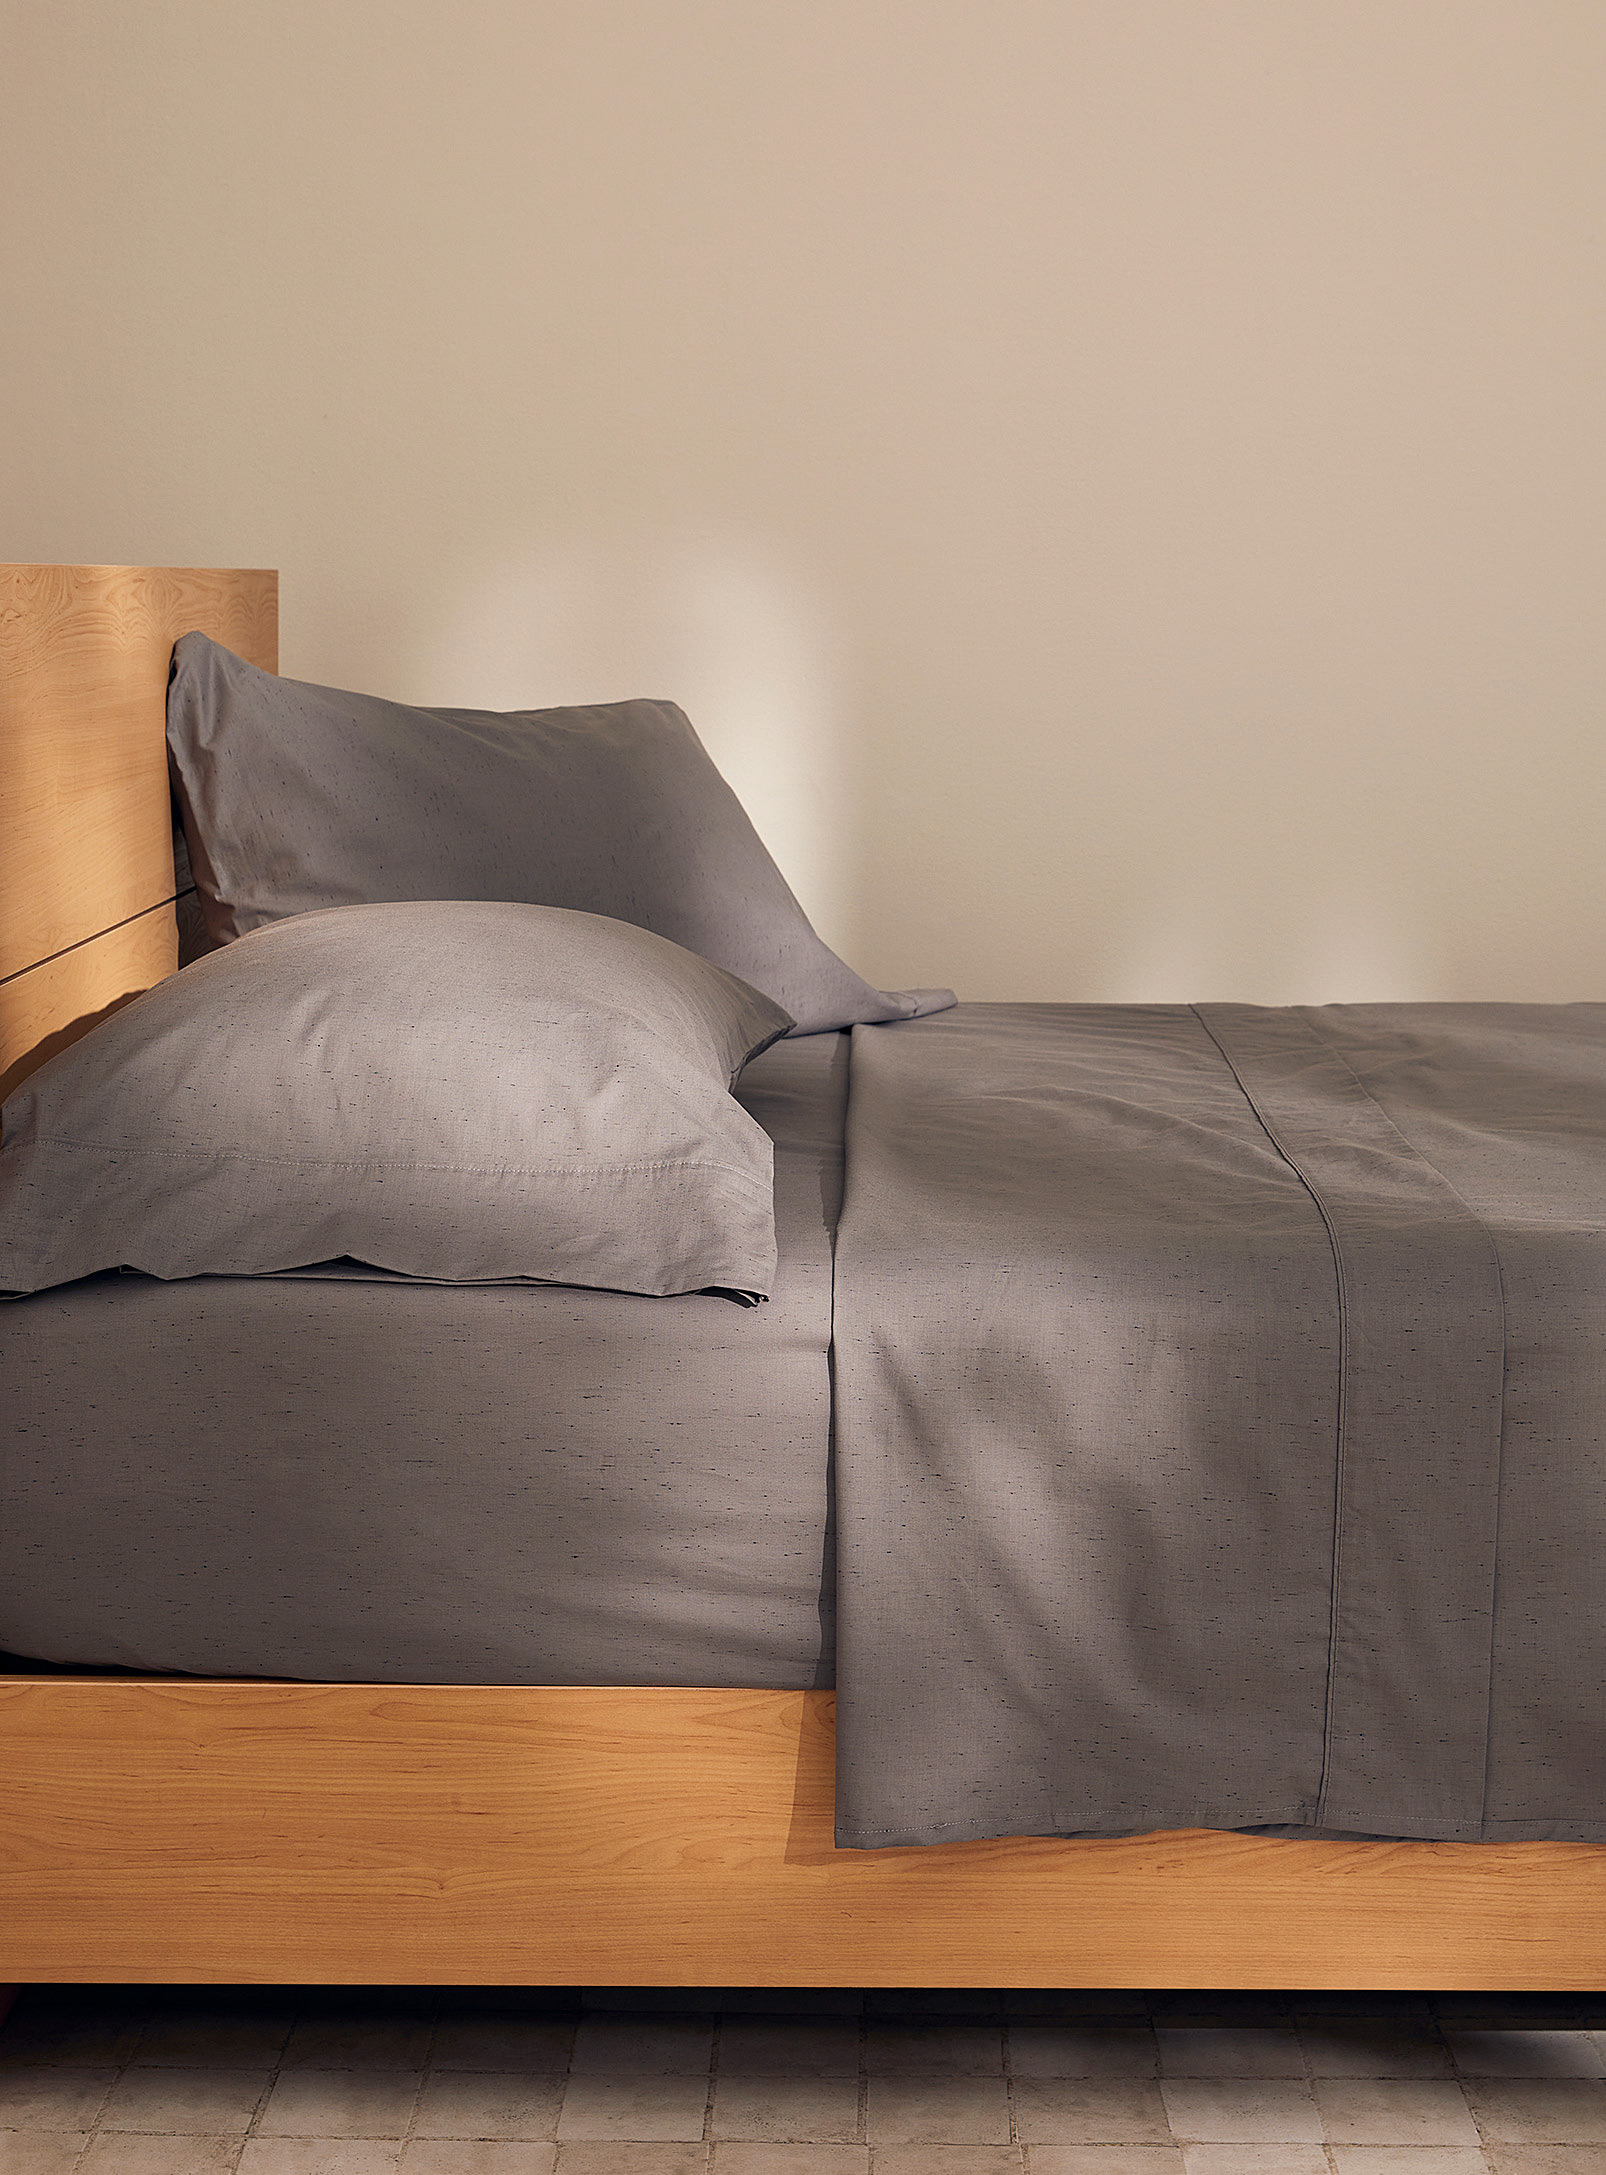 Simons Maison Speckled Sheet Set Fits Mattresses Up To 16 In In Charcoal